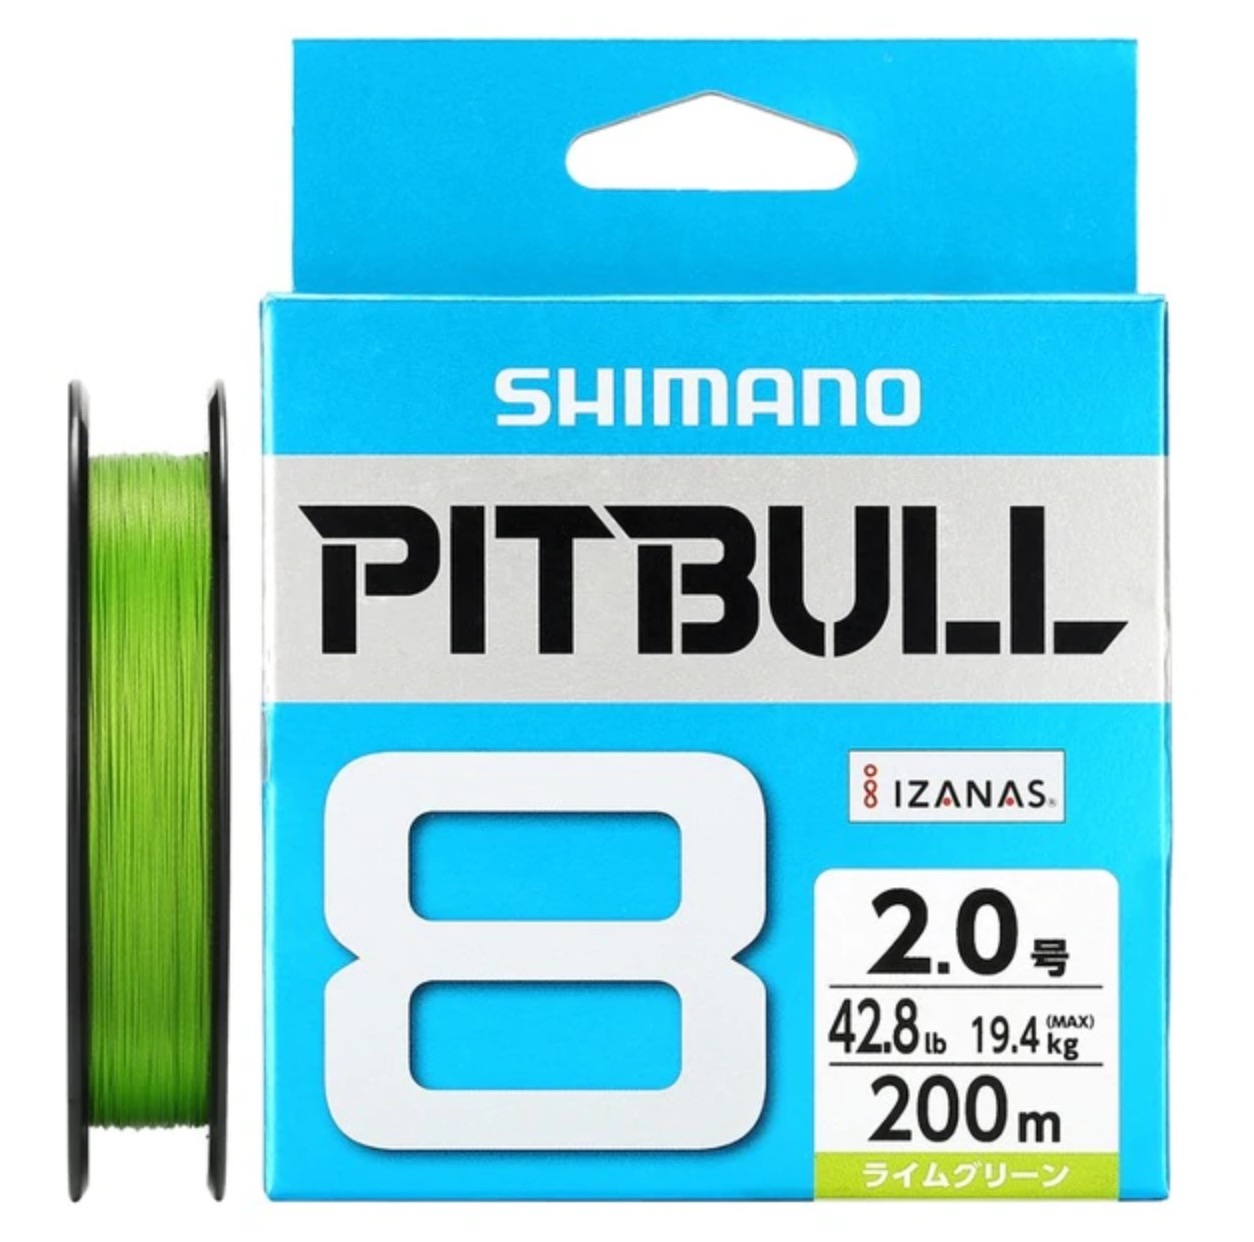 Details about  / NEW Shimano Pitbull X12 Lime Green 200m 23.4lb//10.6kg #1.0 Braided PE Line Japan